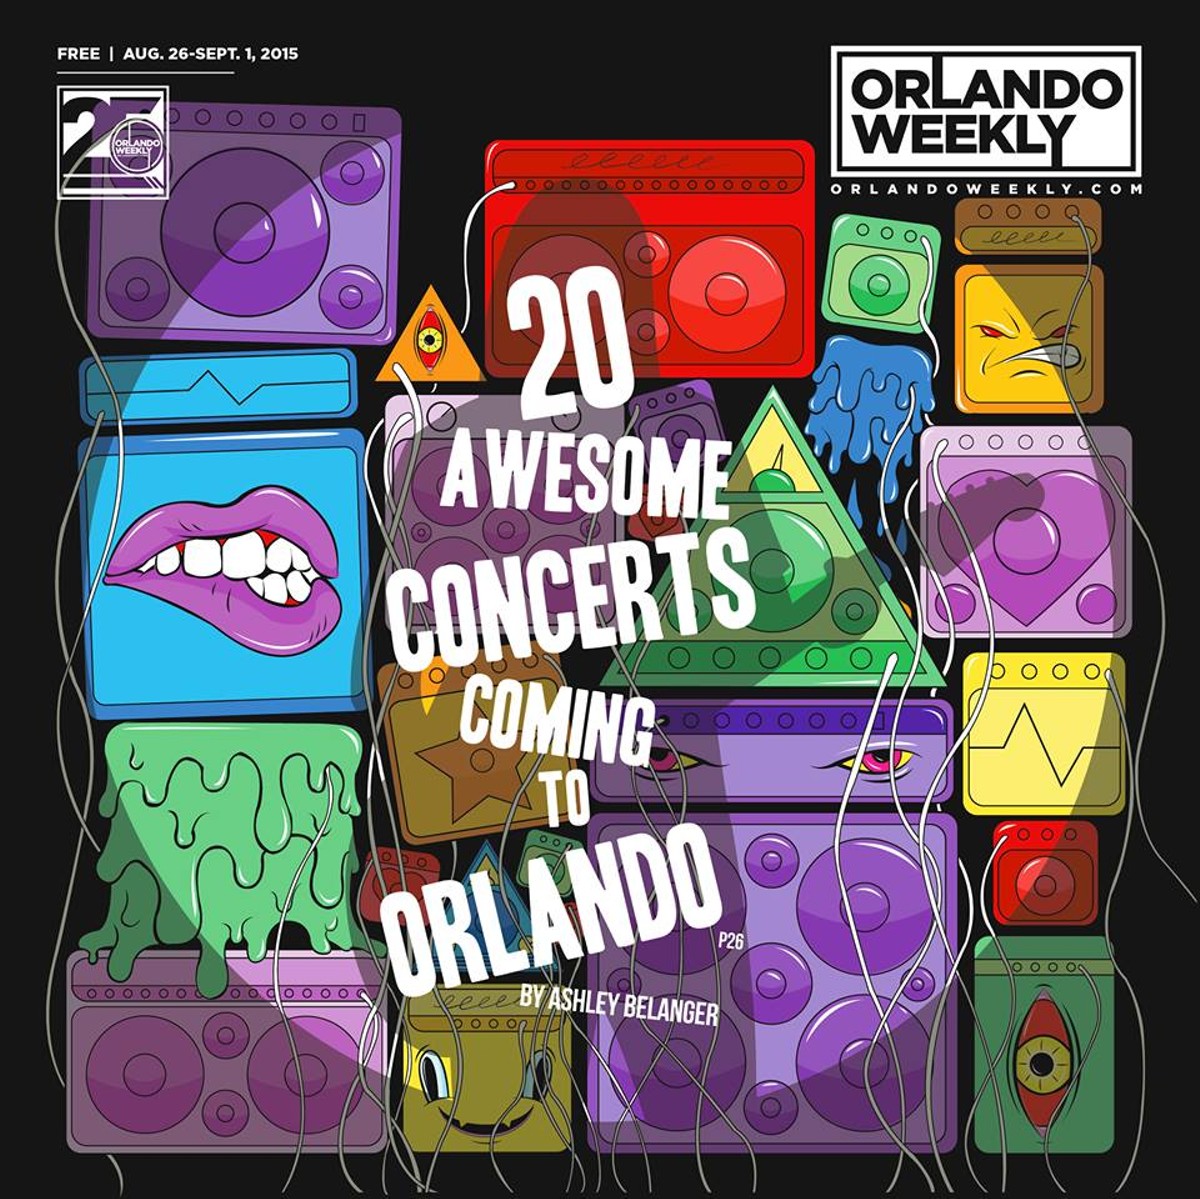 20 awesome concerts coming to Orlando Music Stories + Interviews